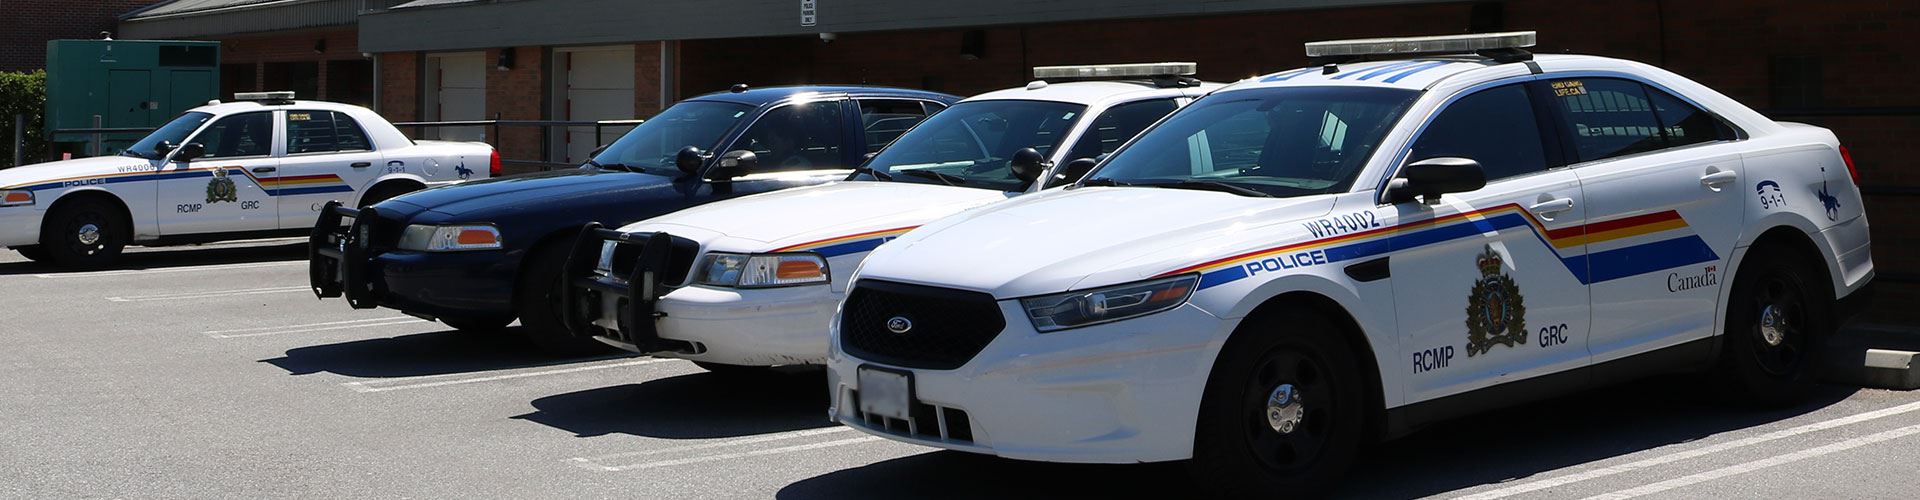 RCMP police cars parked in a row